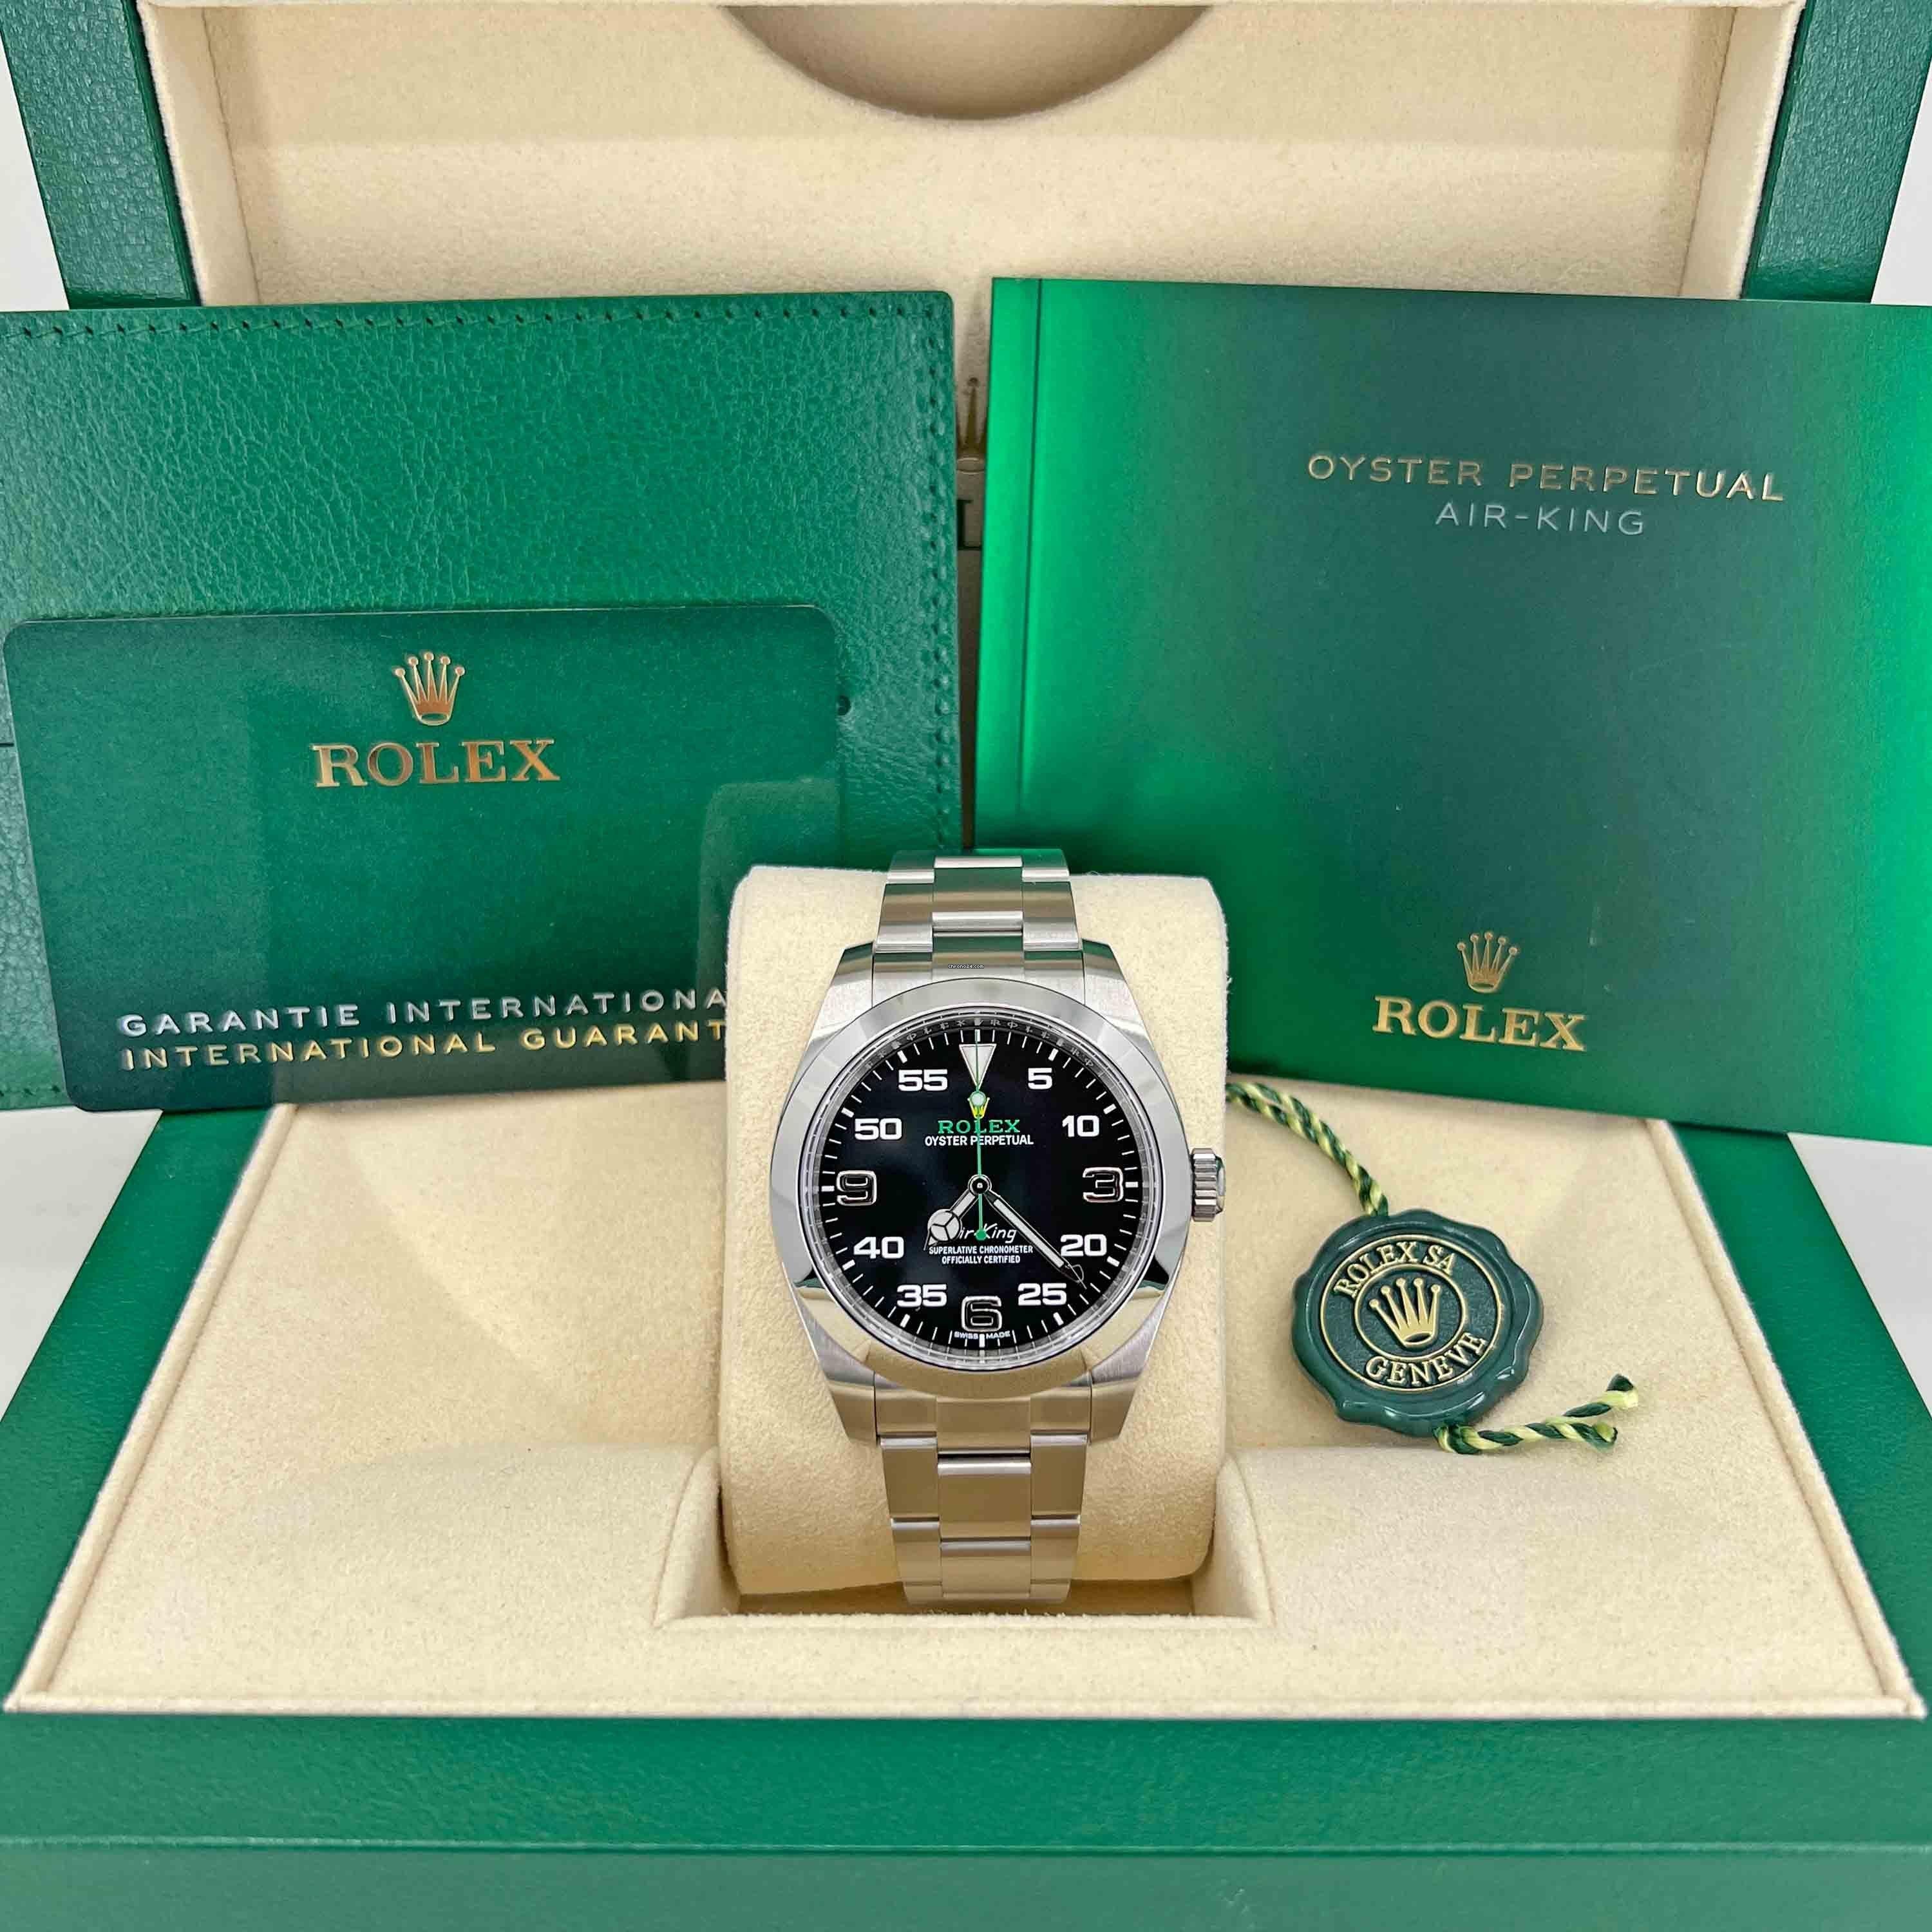 Unworn Rolex Air-King 116900-0001, 40 mm. The watch has Black Dial. The Case is Oystersteel. Movement 3131, Manufacture Rolex, Approximately 48 hours power reserve. The Bracelet Oystersteel with Folding Oysterclasp with Easylink 5 mm comfort